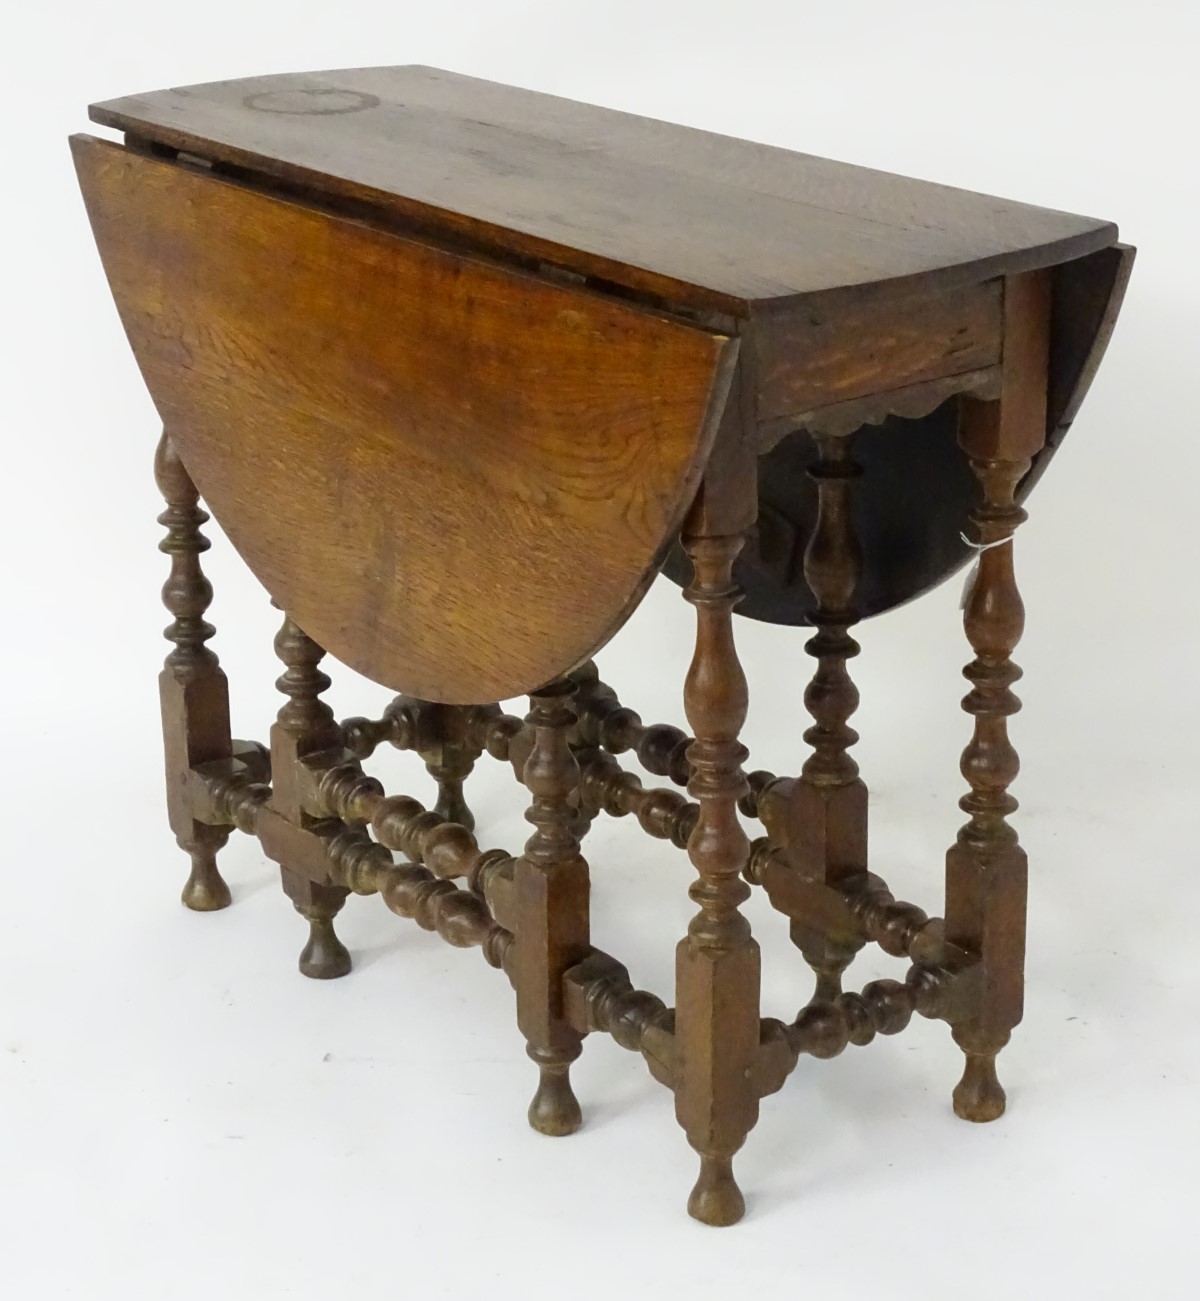 A mid 18thC oak gateleg table opening to form an oval top, - Image 3 of 6